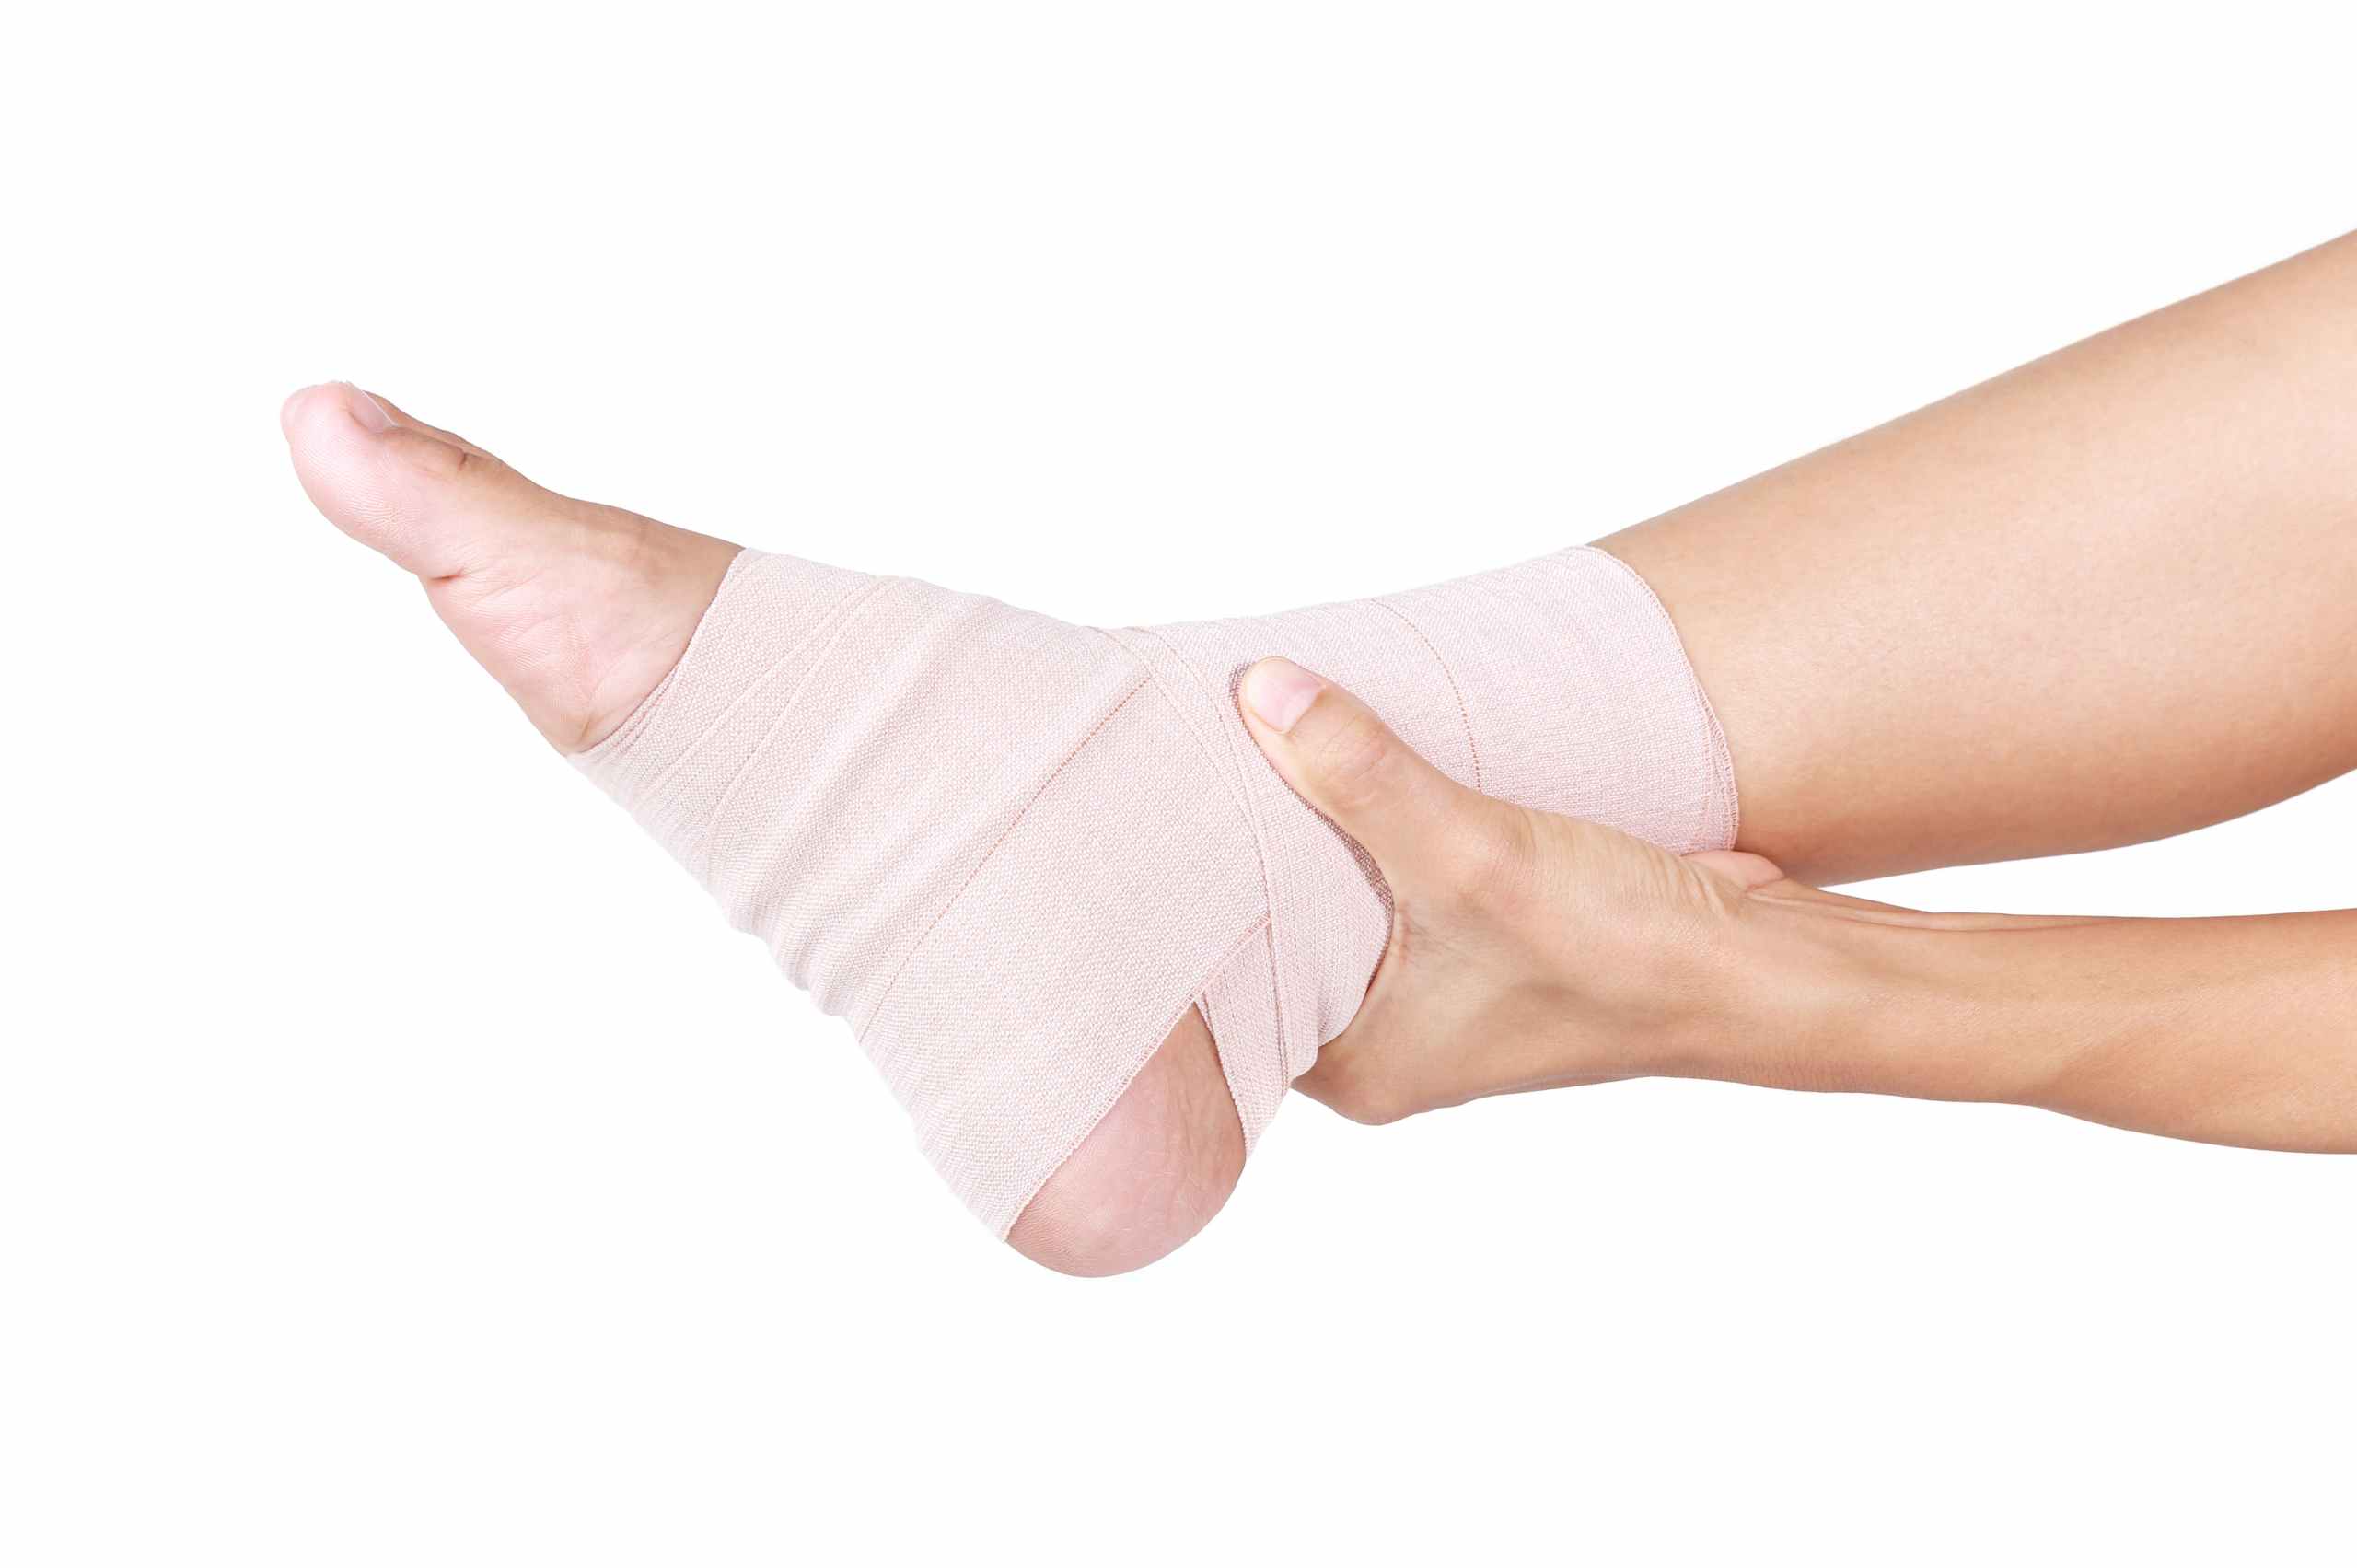 Elixir Muscle Sprain Injury Recovery - Common Sports Injuries